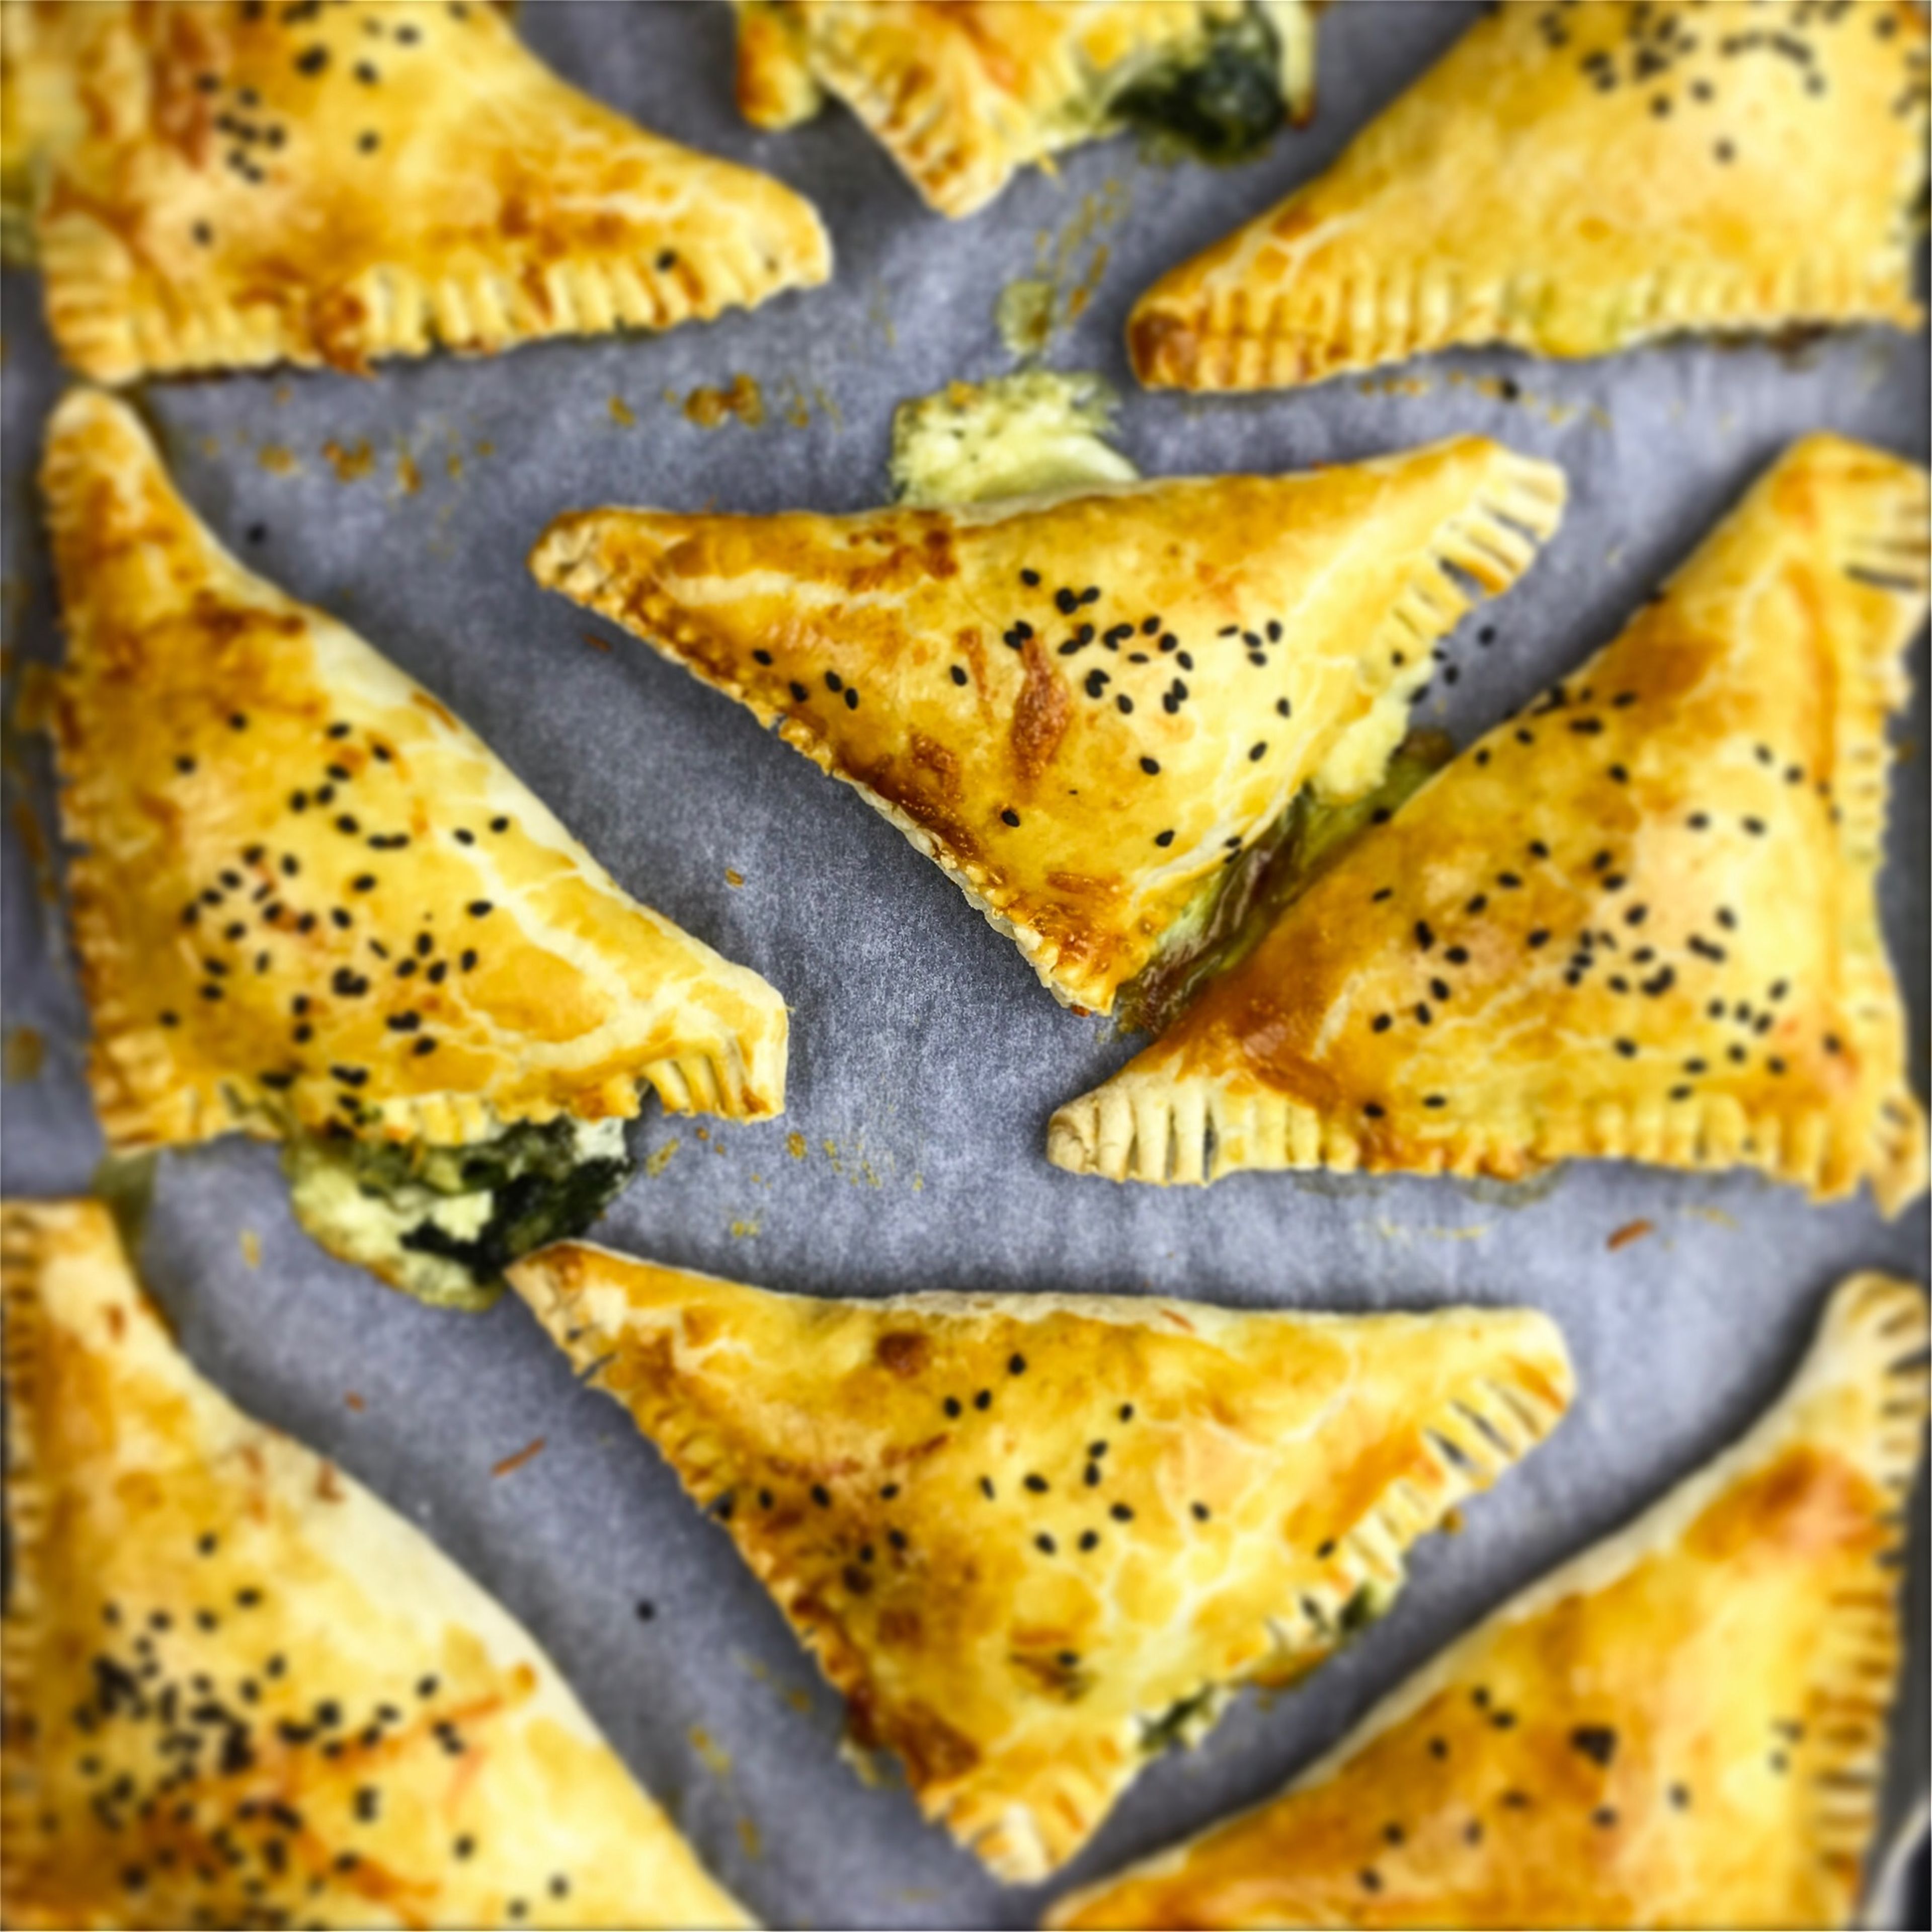 Cheese and spinach triangles